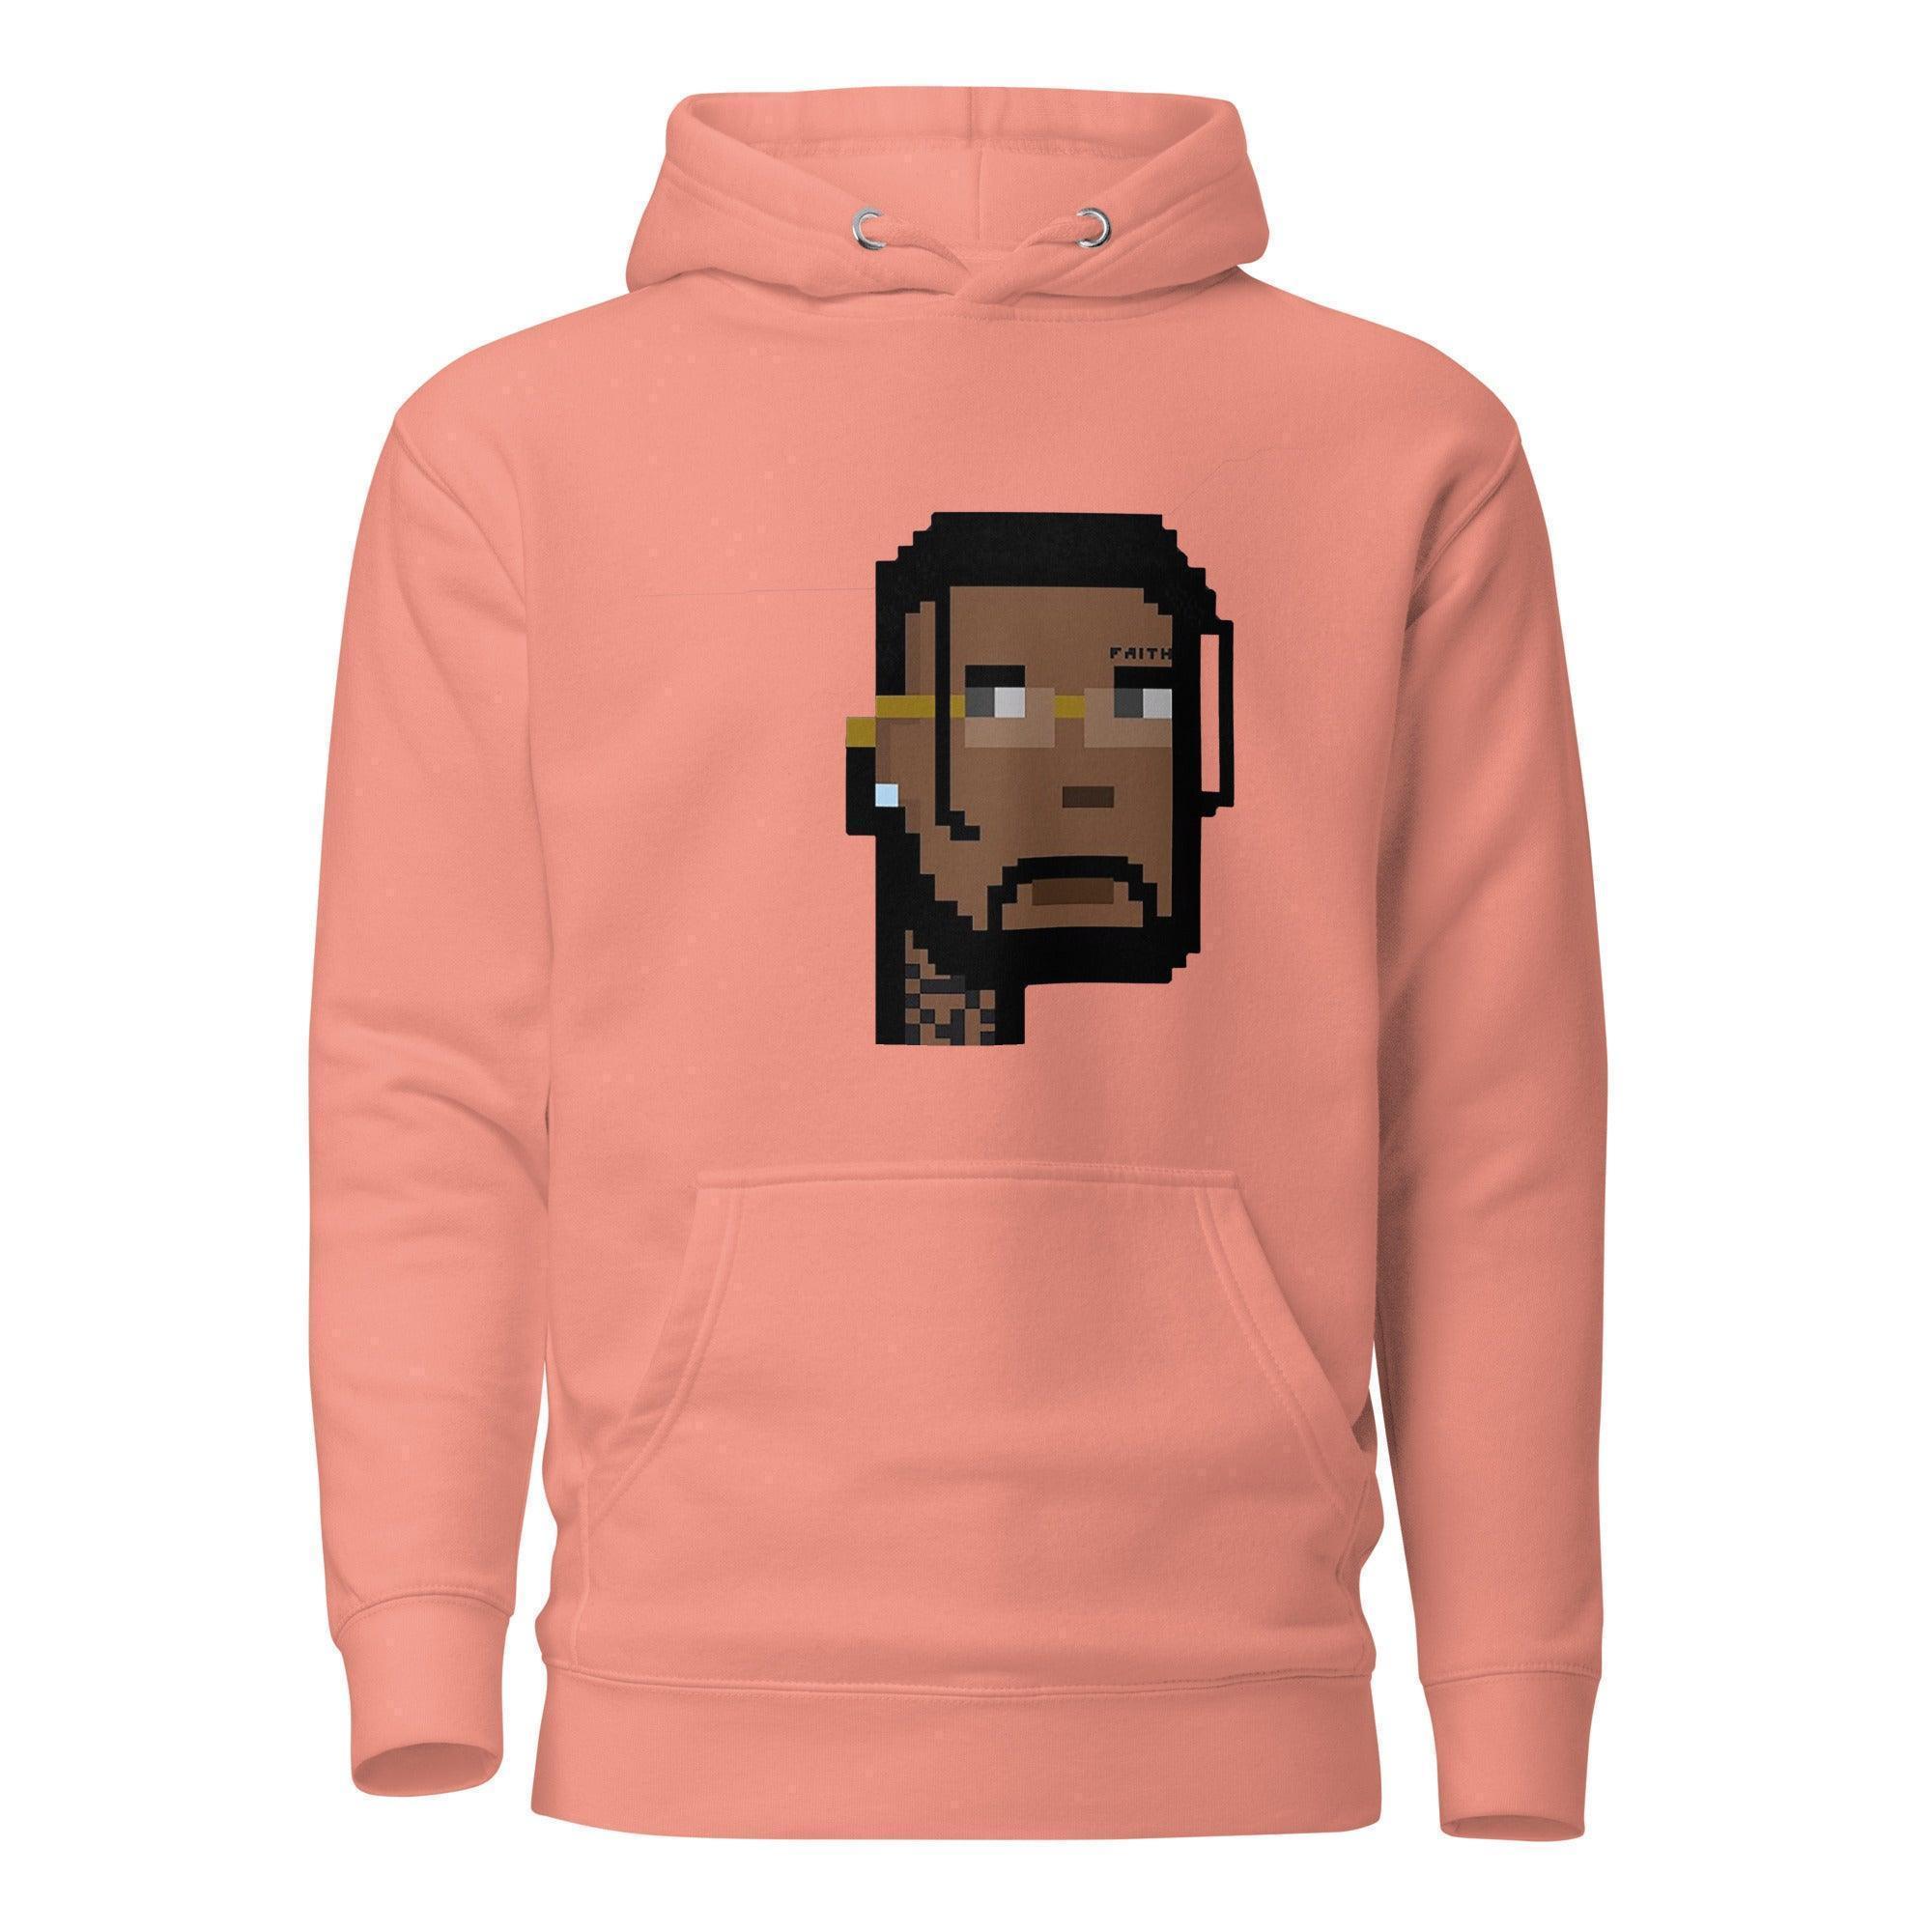 Celebrity Punk 1 Pullover Hoodie - InvestmenTees